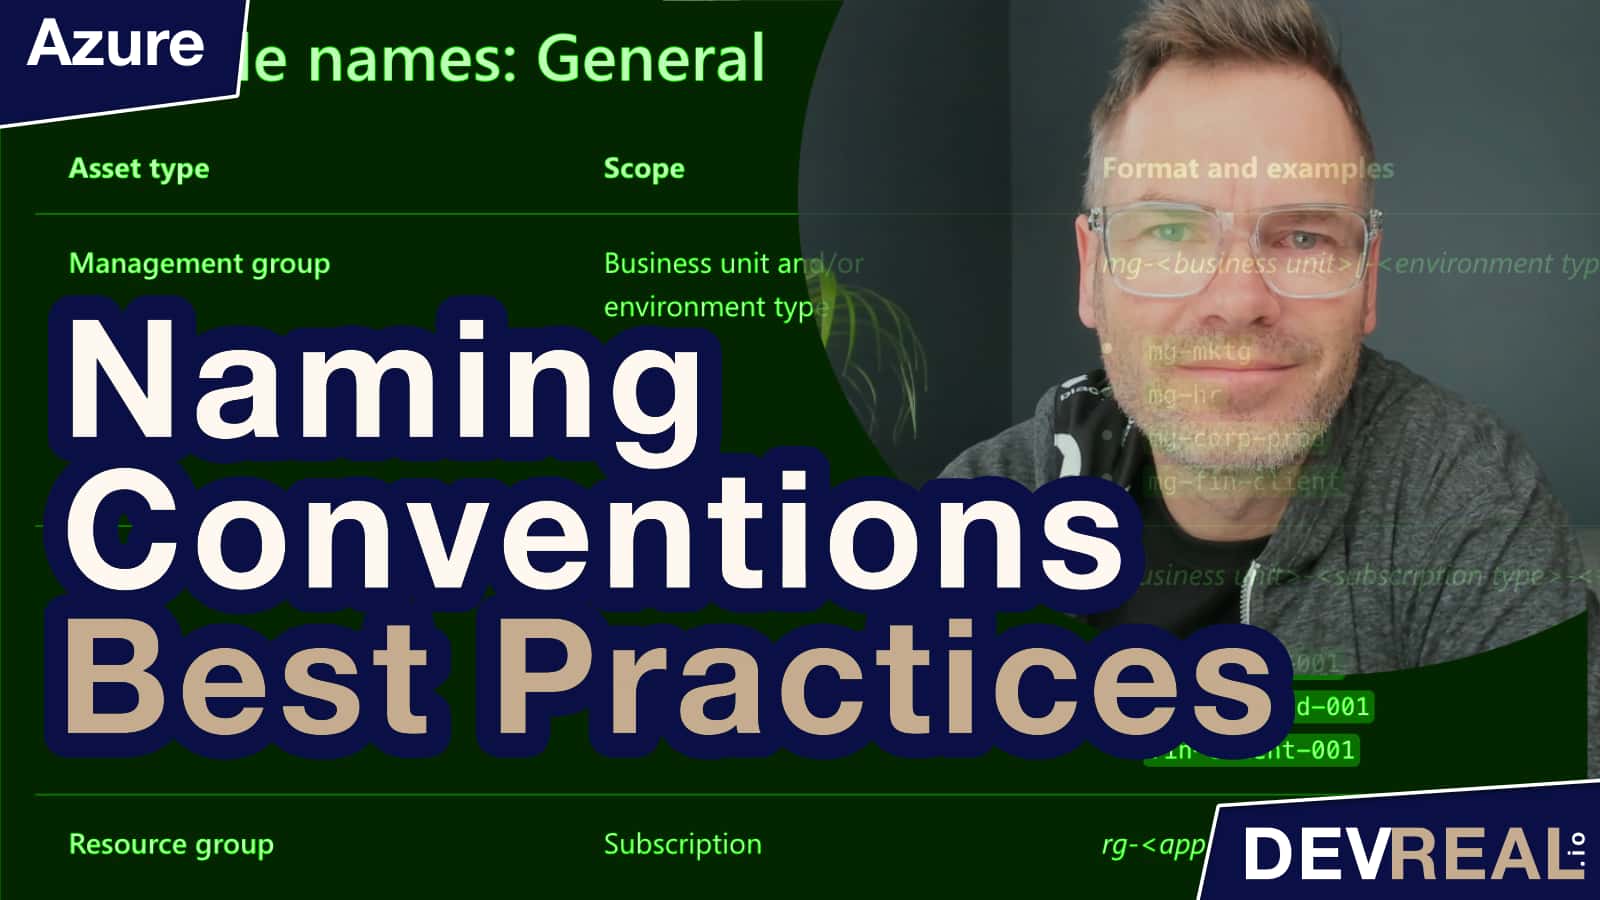 Azure Naming Convention Best Practices